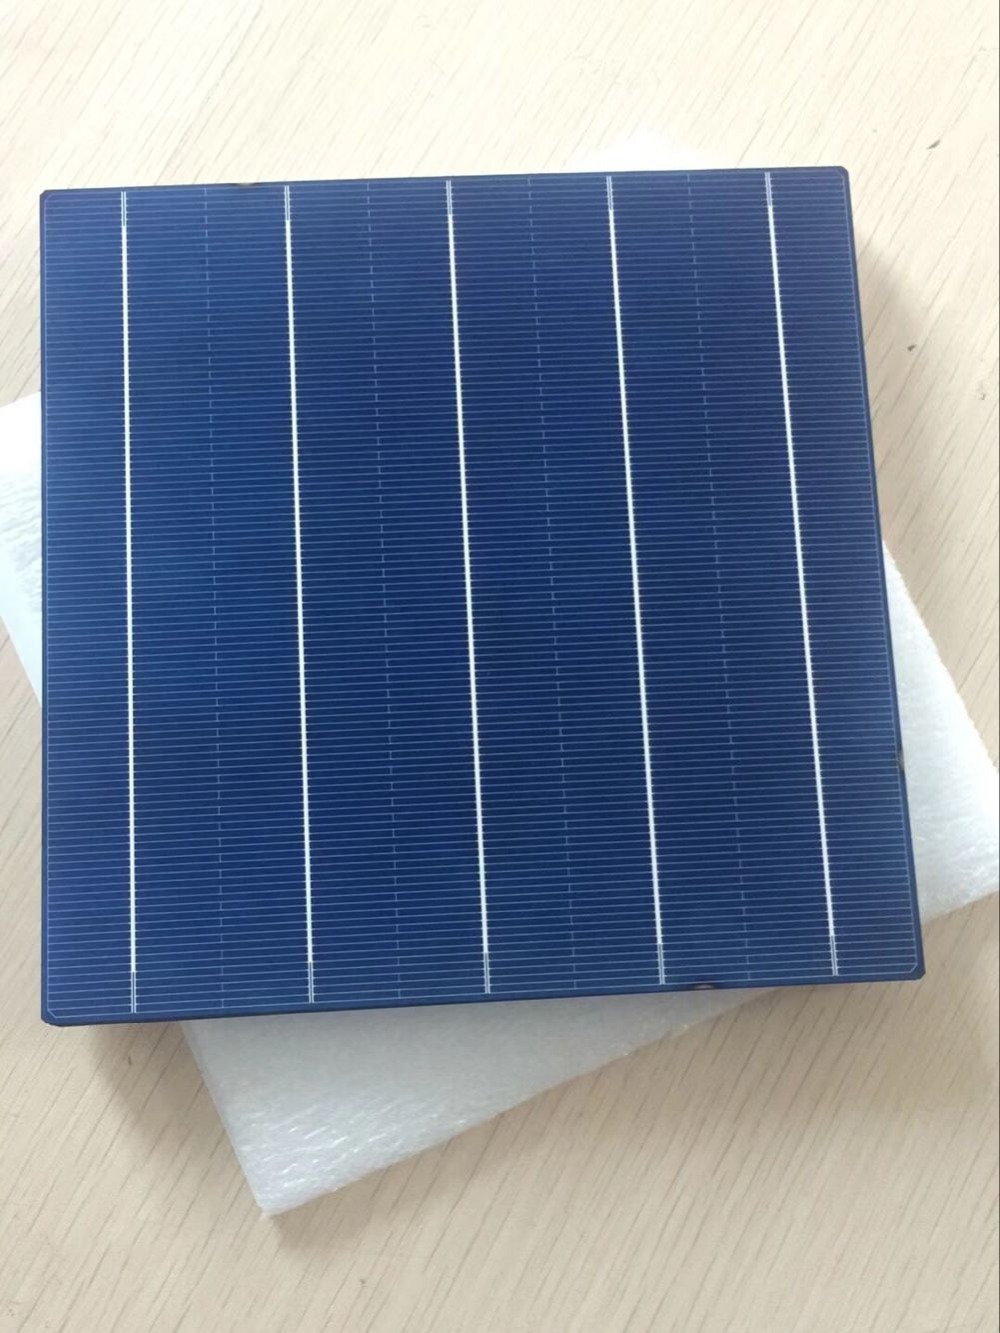 10Pcs 156.75MM DIY Polycrystalline Solar Panel Battery Cell 6x6 China Cheap Prices